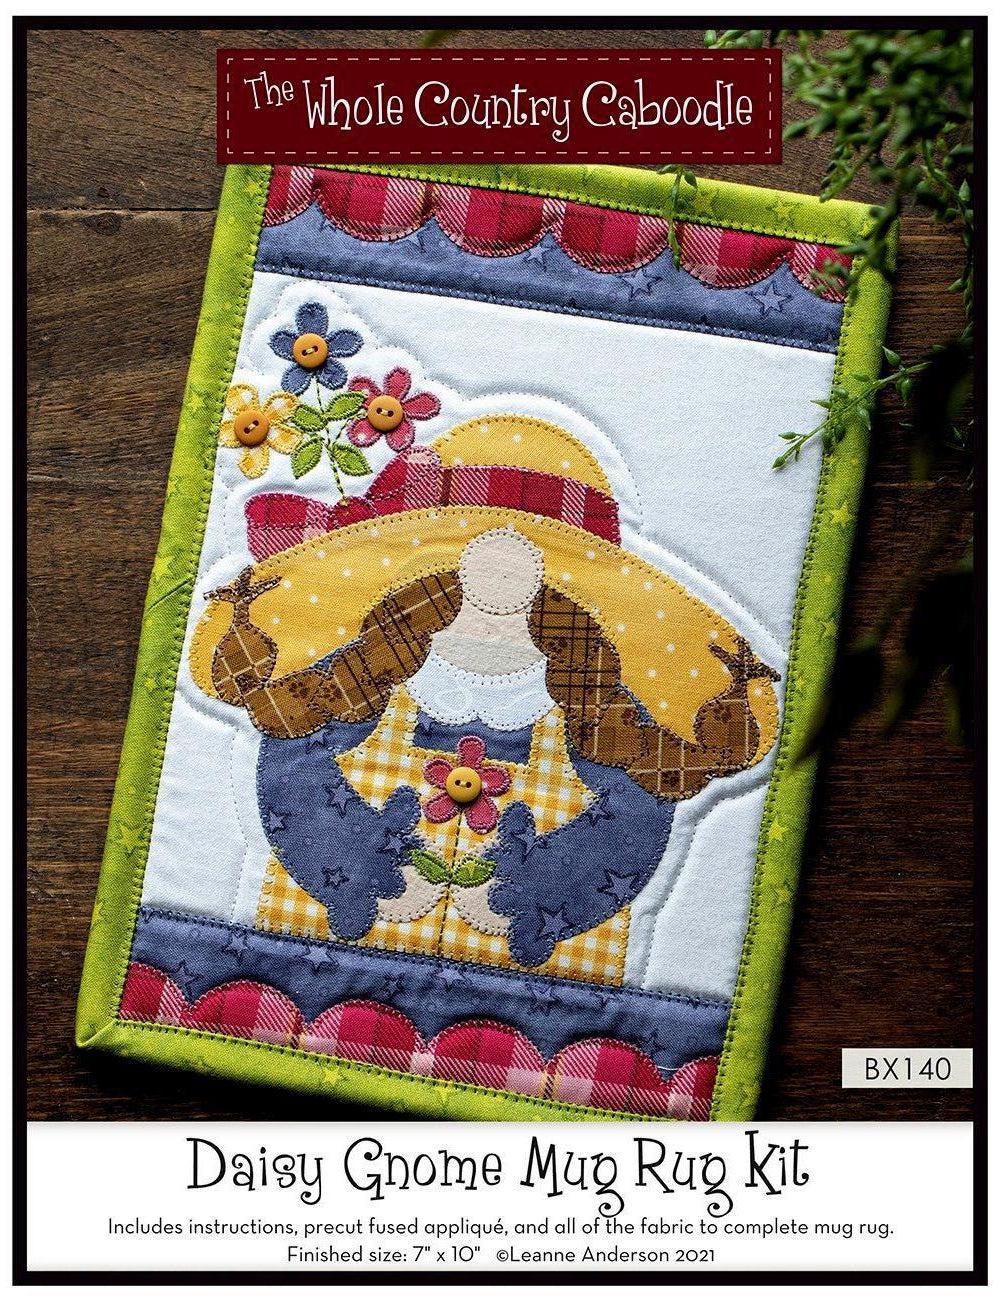 Daisy Gnome Mug Rug Kit-The Whole Country Caboodle-My Favorite Quilt Store